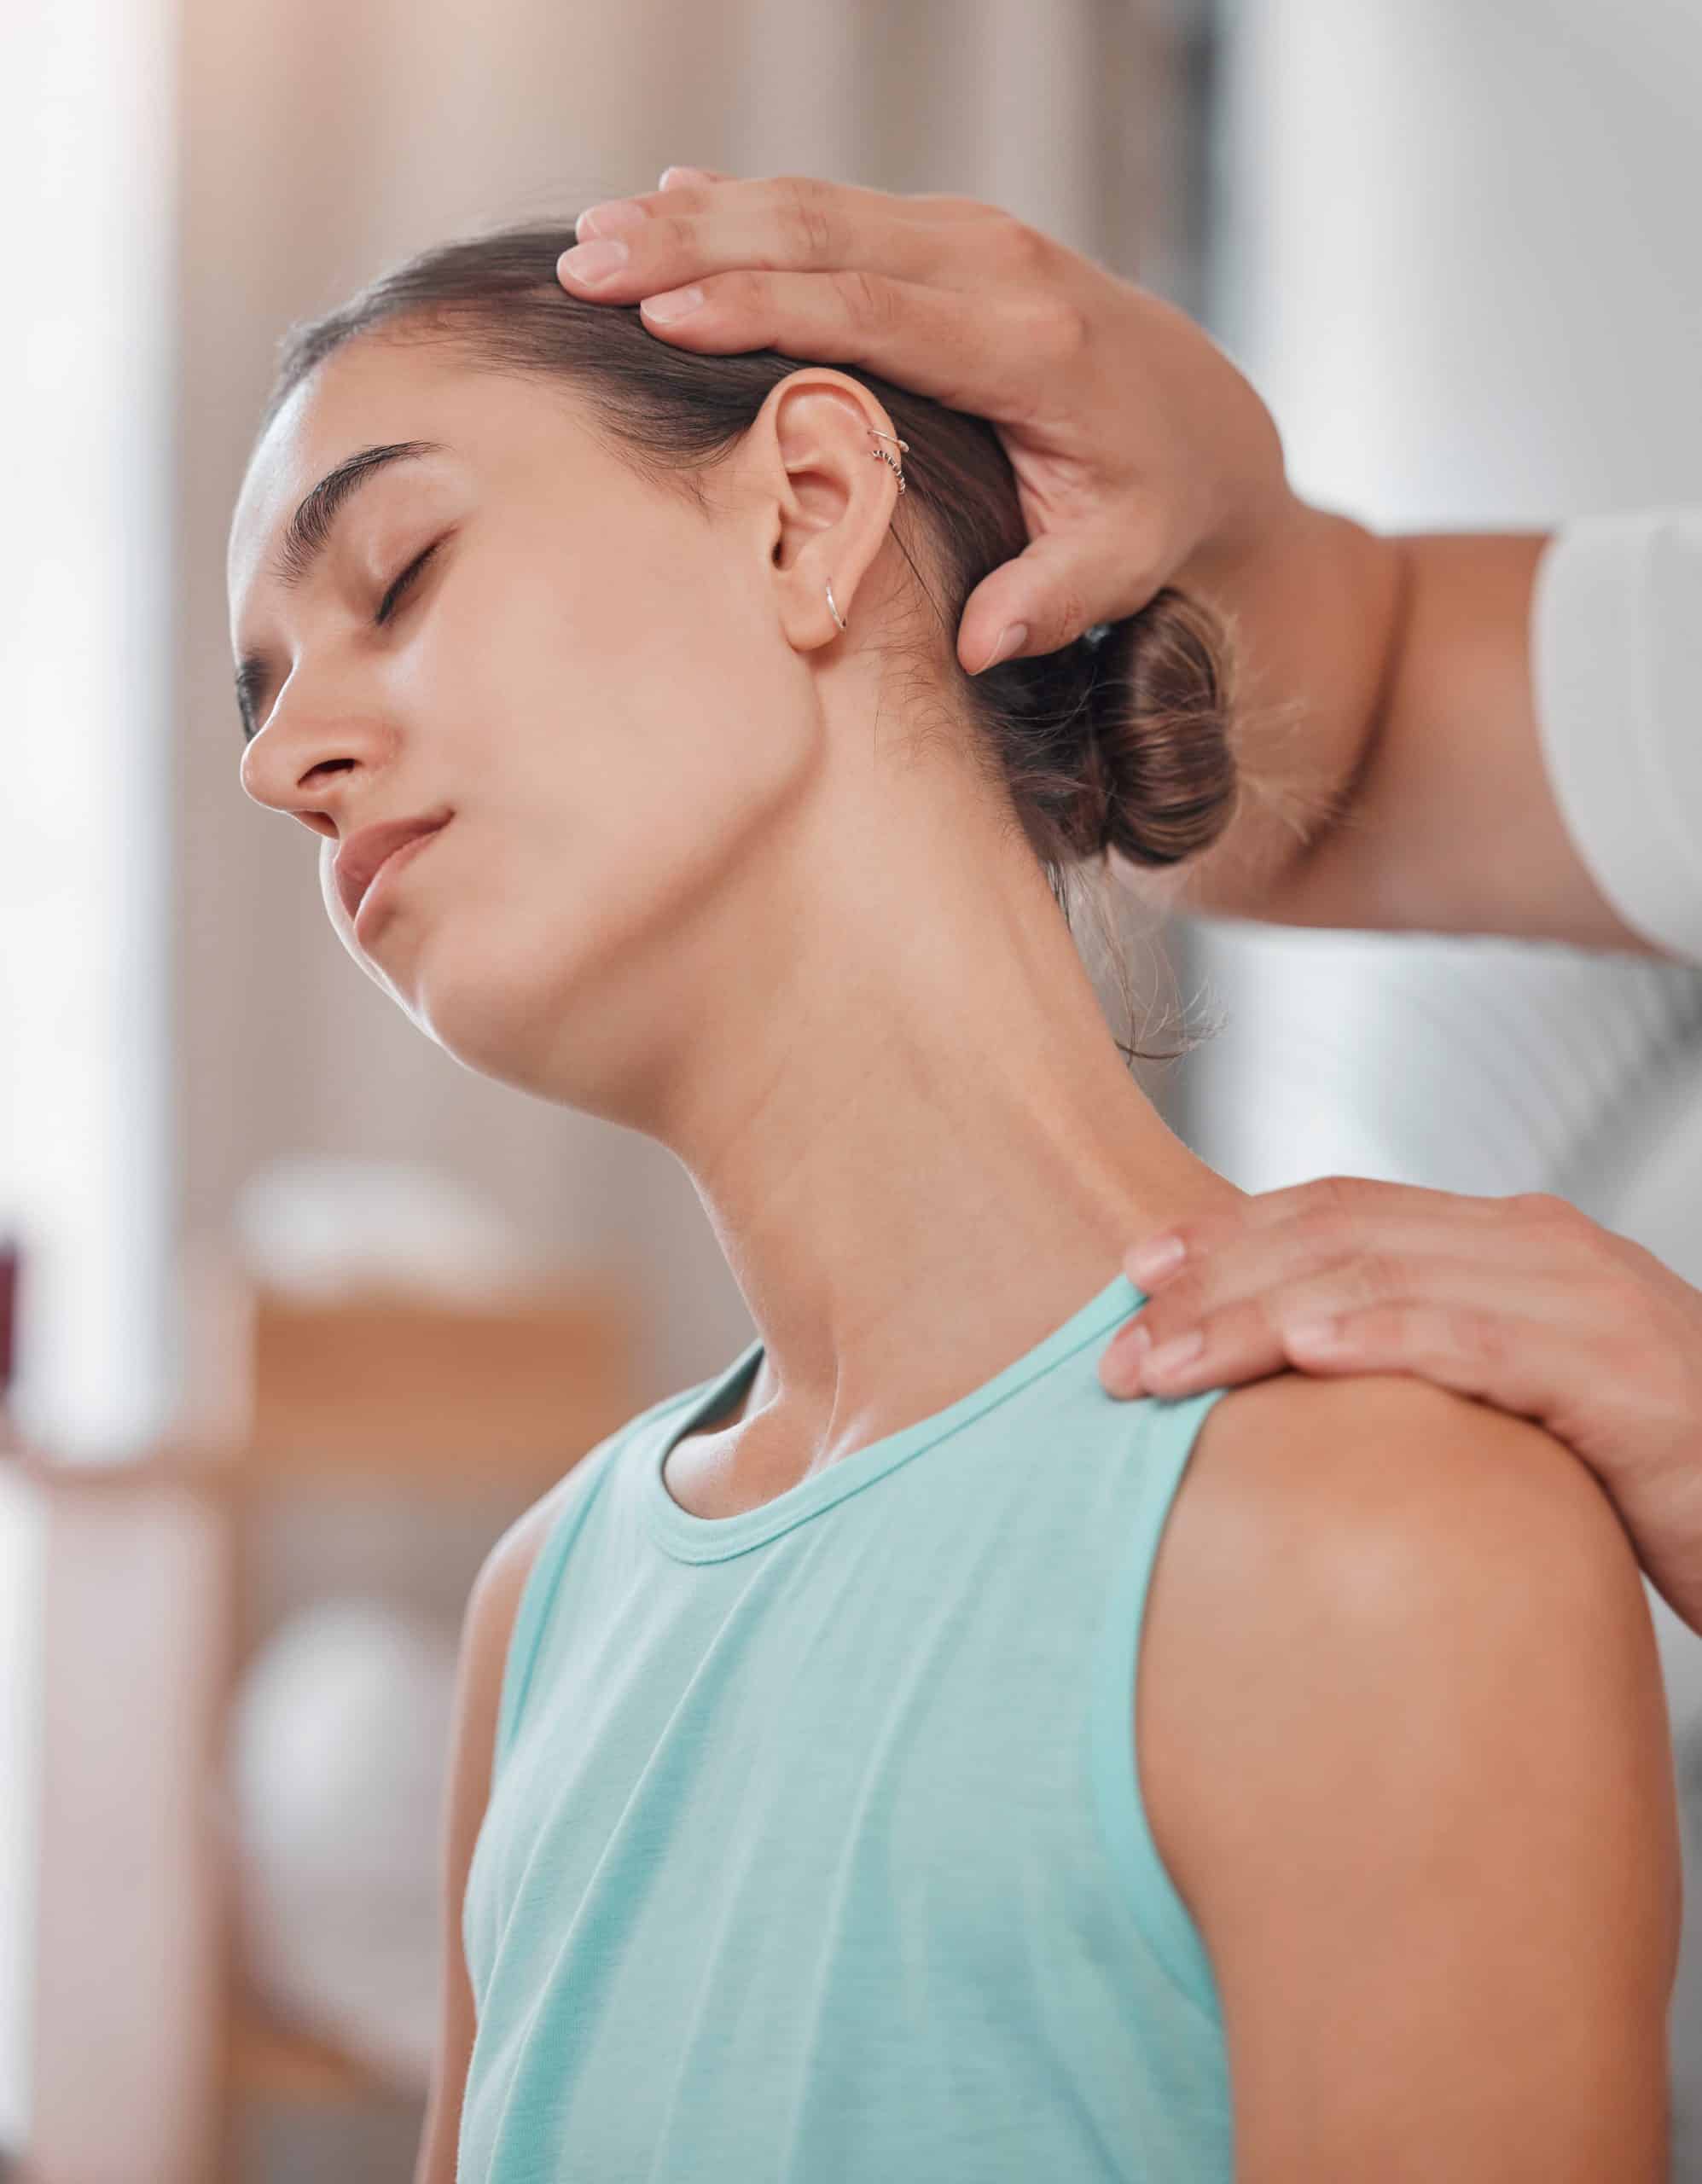 What Can Neck Pain Mean?